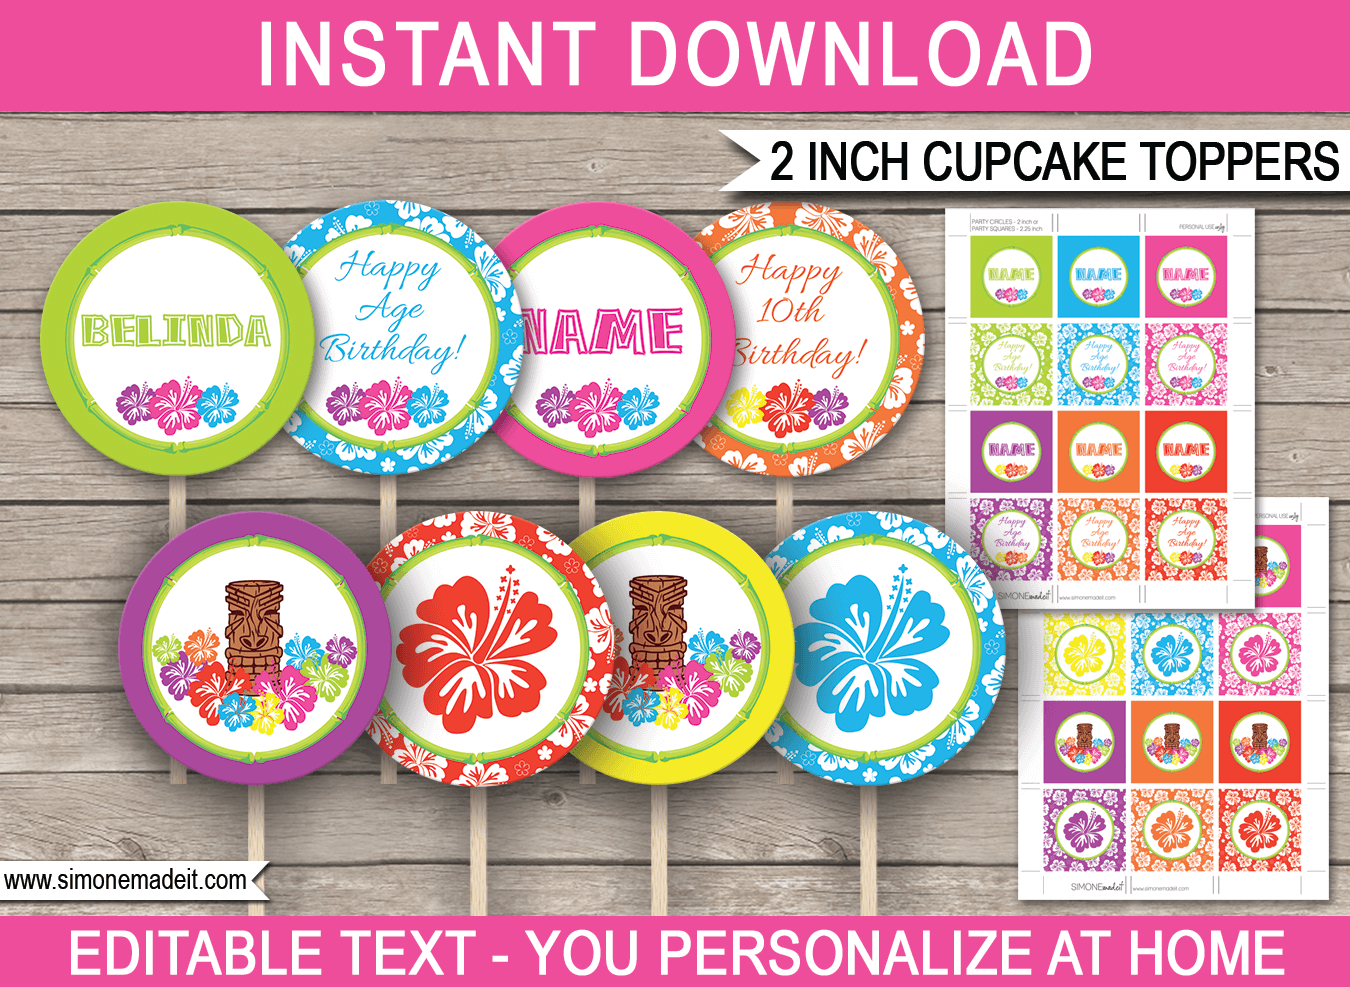 Printable Luau Cupcake Toppers Template | 2 inch | Gift Tags | DIY Editable Text | INSTANT DOWNLOAD via simonemadeit.com